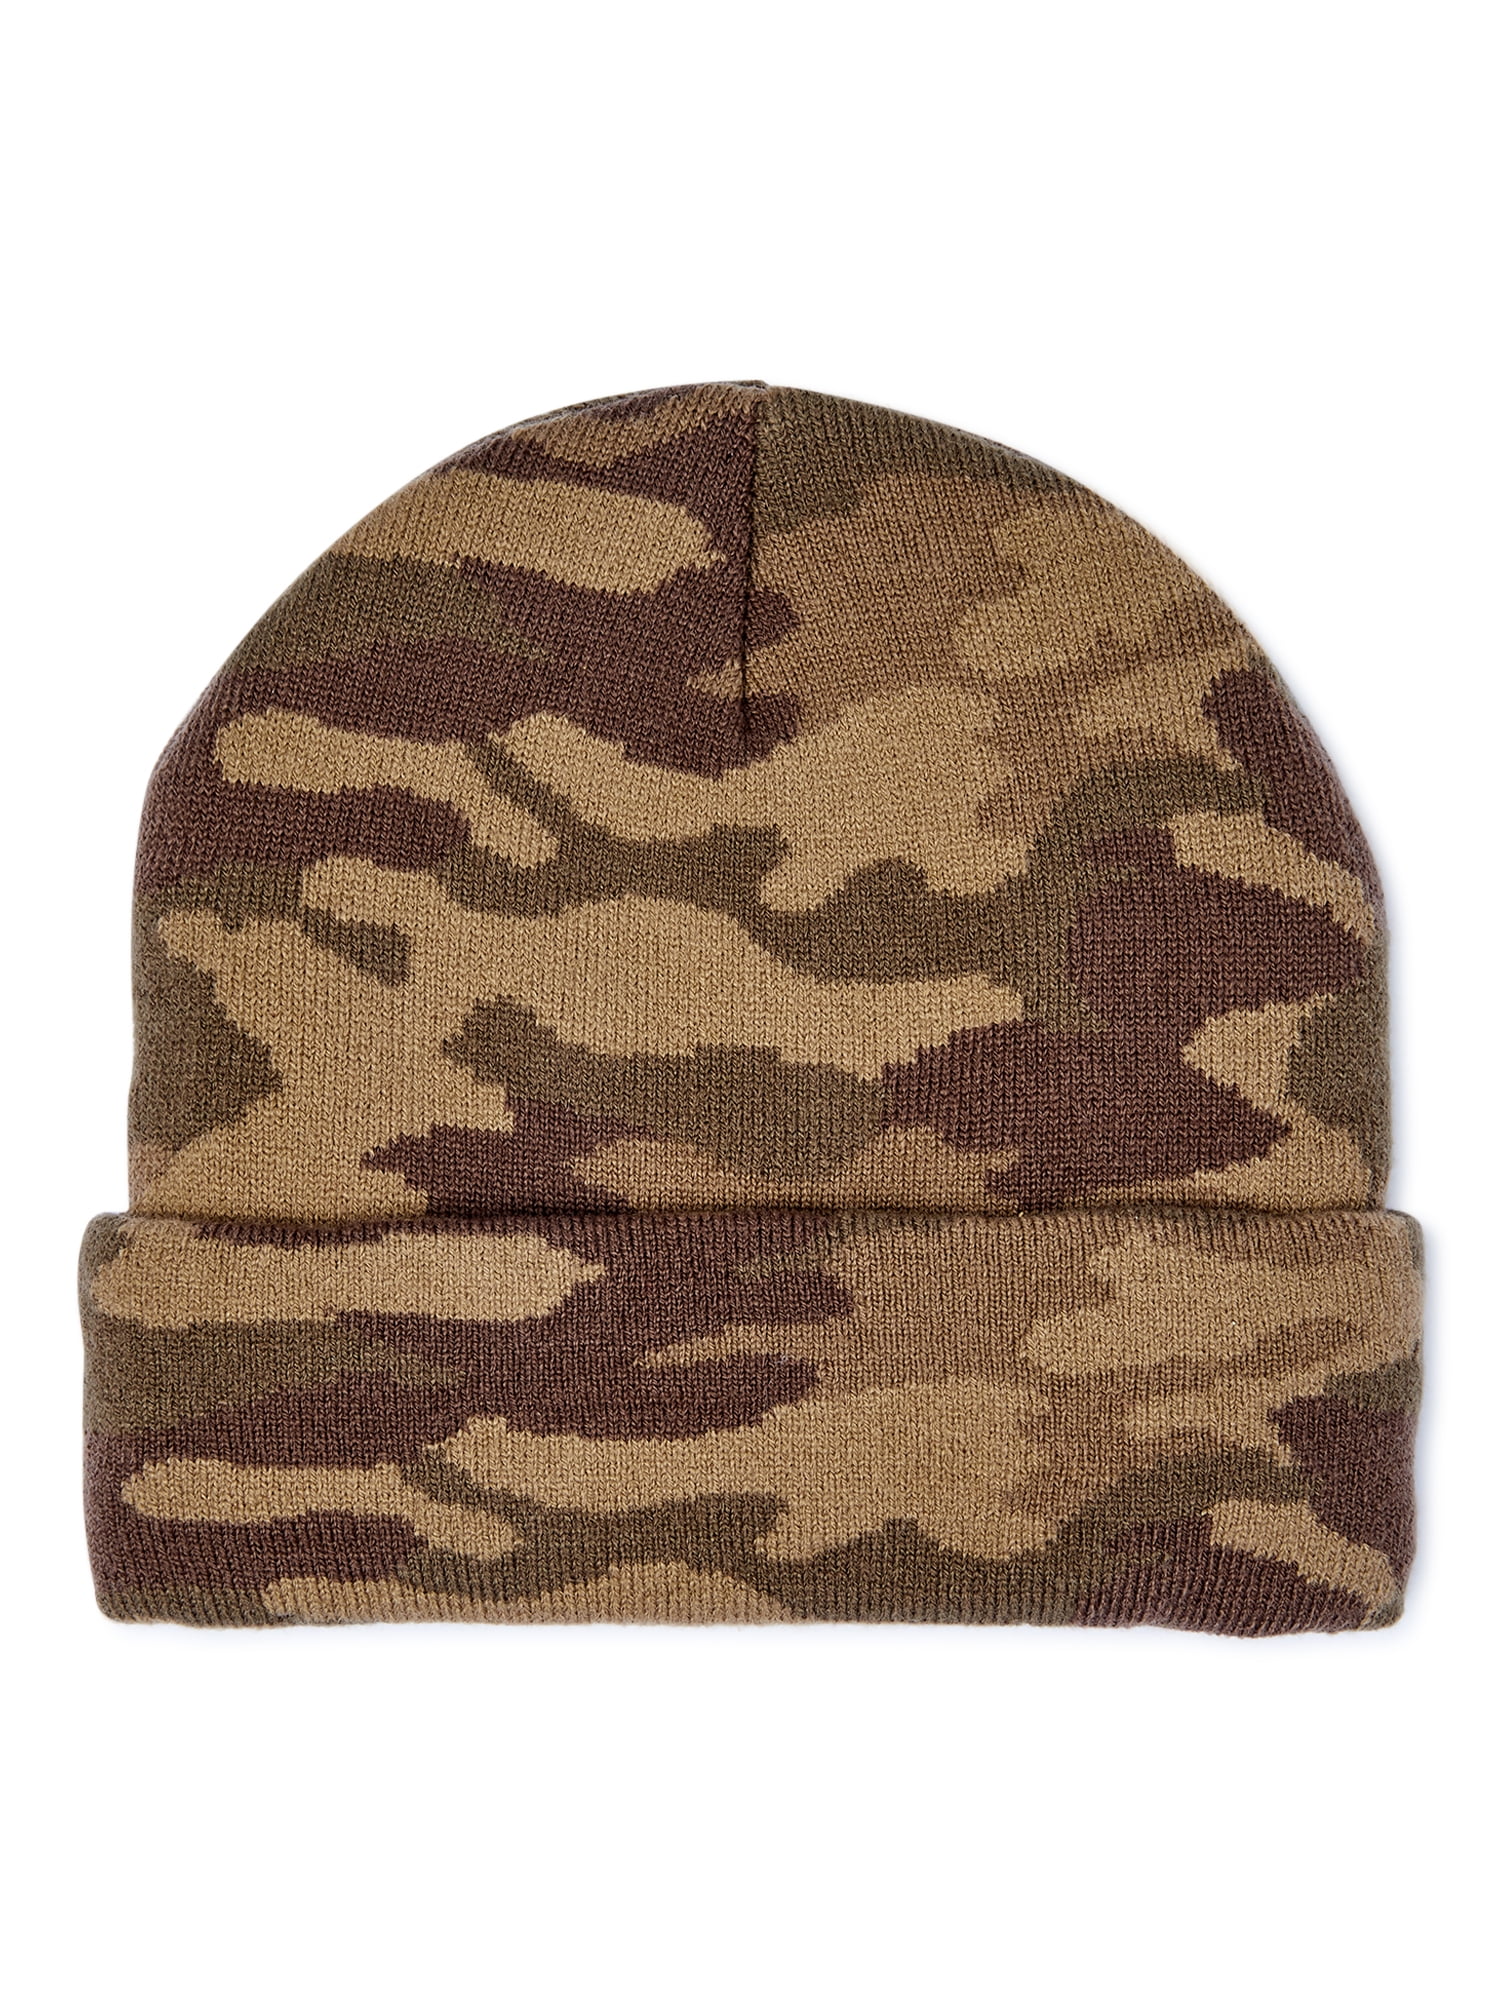 Gravity Threads Soft Camouflage Cuff Beanie, Camel at  Women's  Clothing store